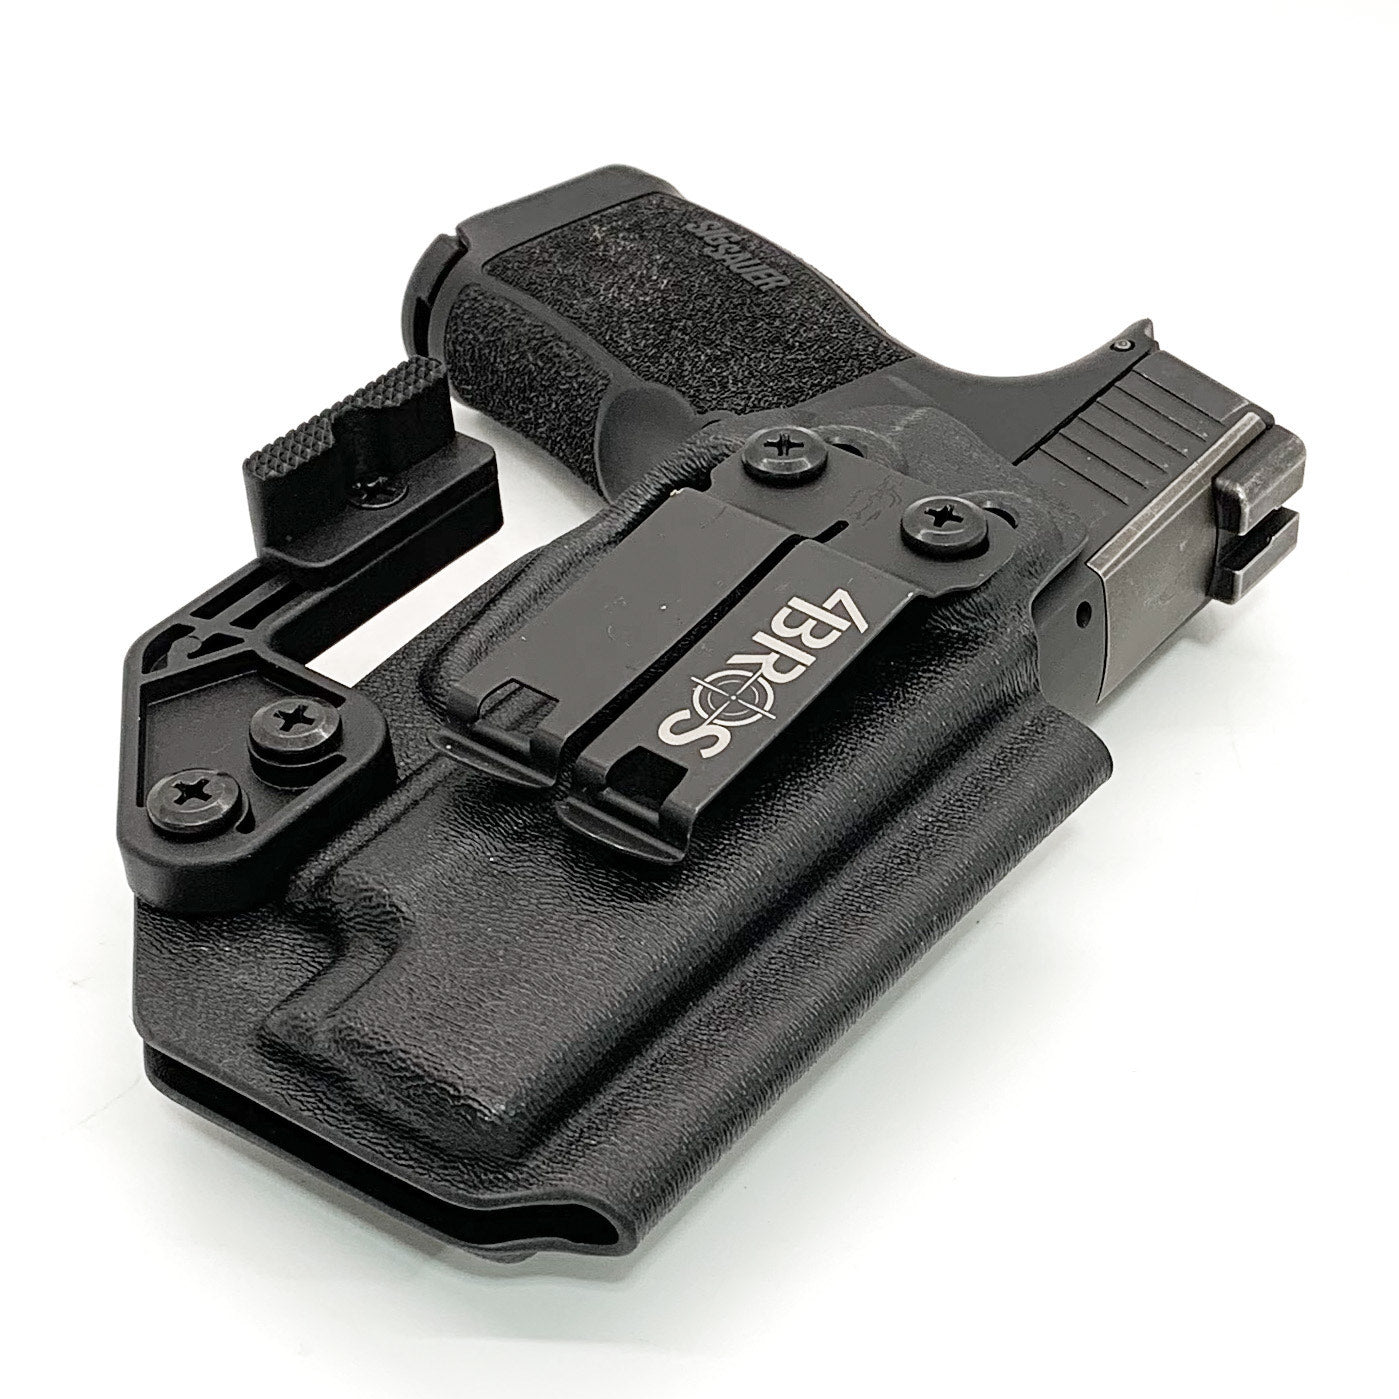 Inside waistband IWB kydex holster designed to fit the Sig Sauer P365XL P365X, P365XL Spectre,  P365X/XL RomeoZero, and P365 SAS with GoGuns Gas Pedal holster. Adjustable retention, high sweat guard, optional Modwing  to reduce firearm printing Rides close to body, comfortable & durable 